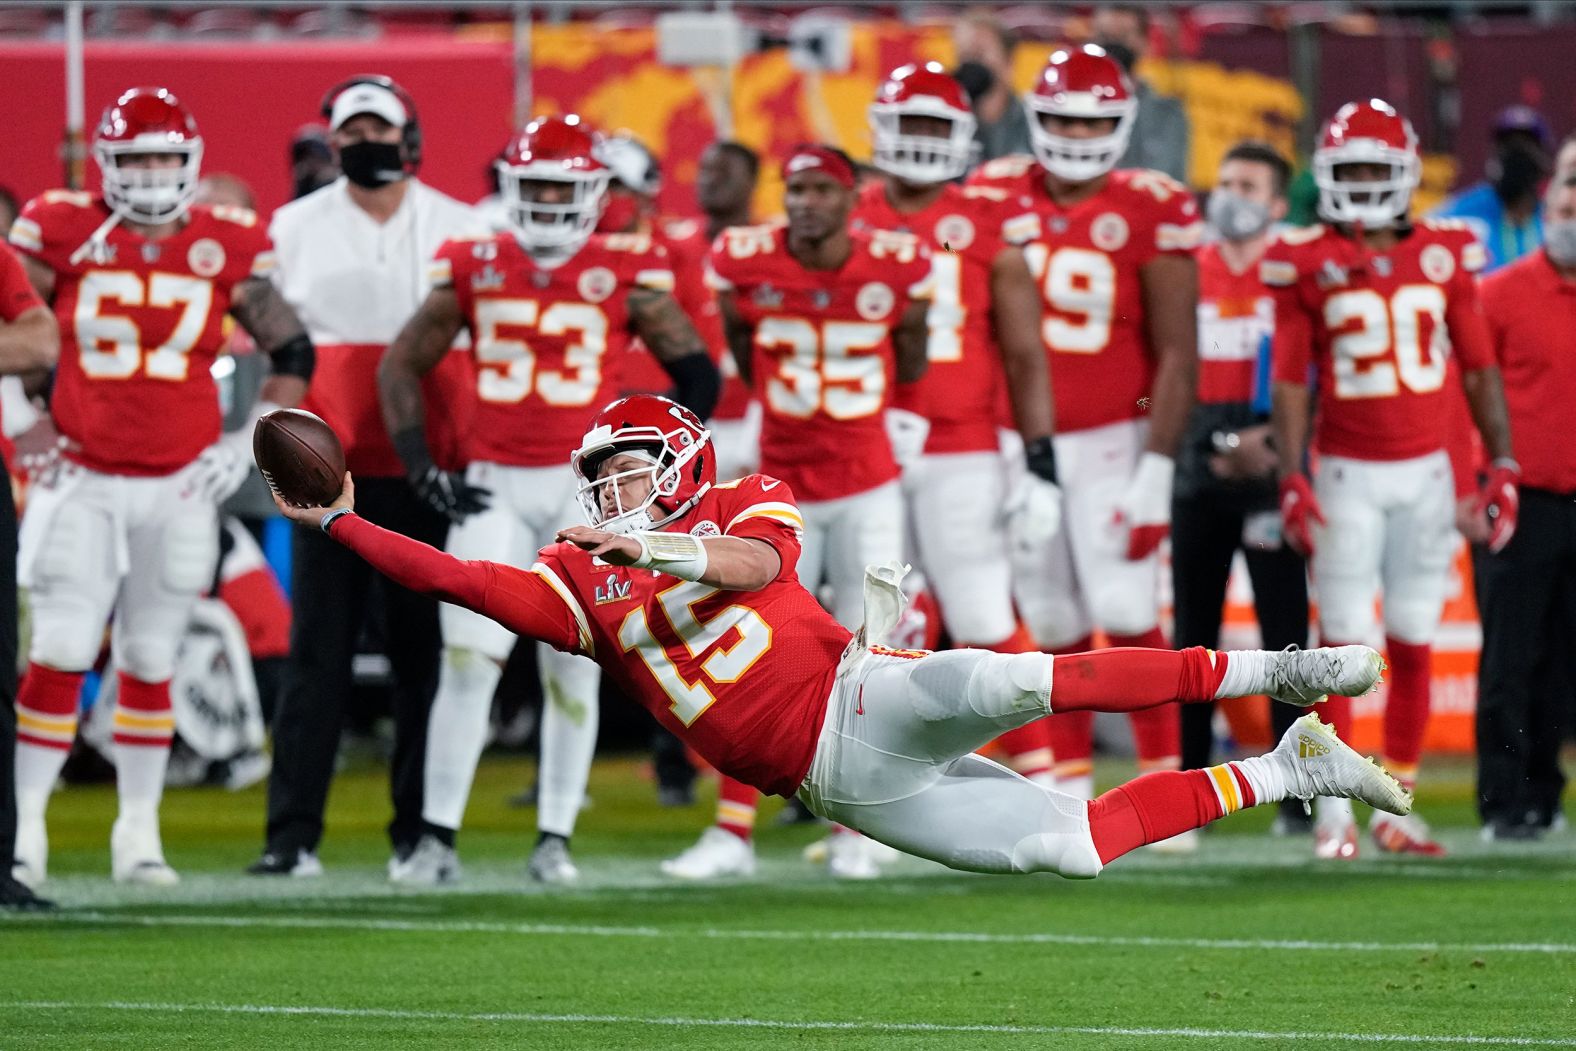 Mahomes attempts a pass while falling down in the second half.